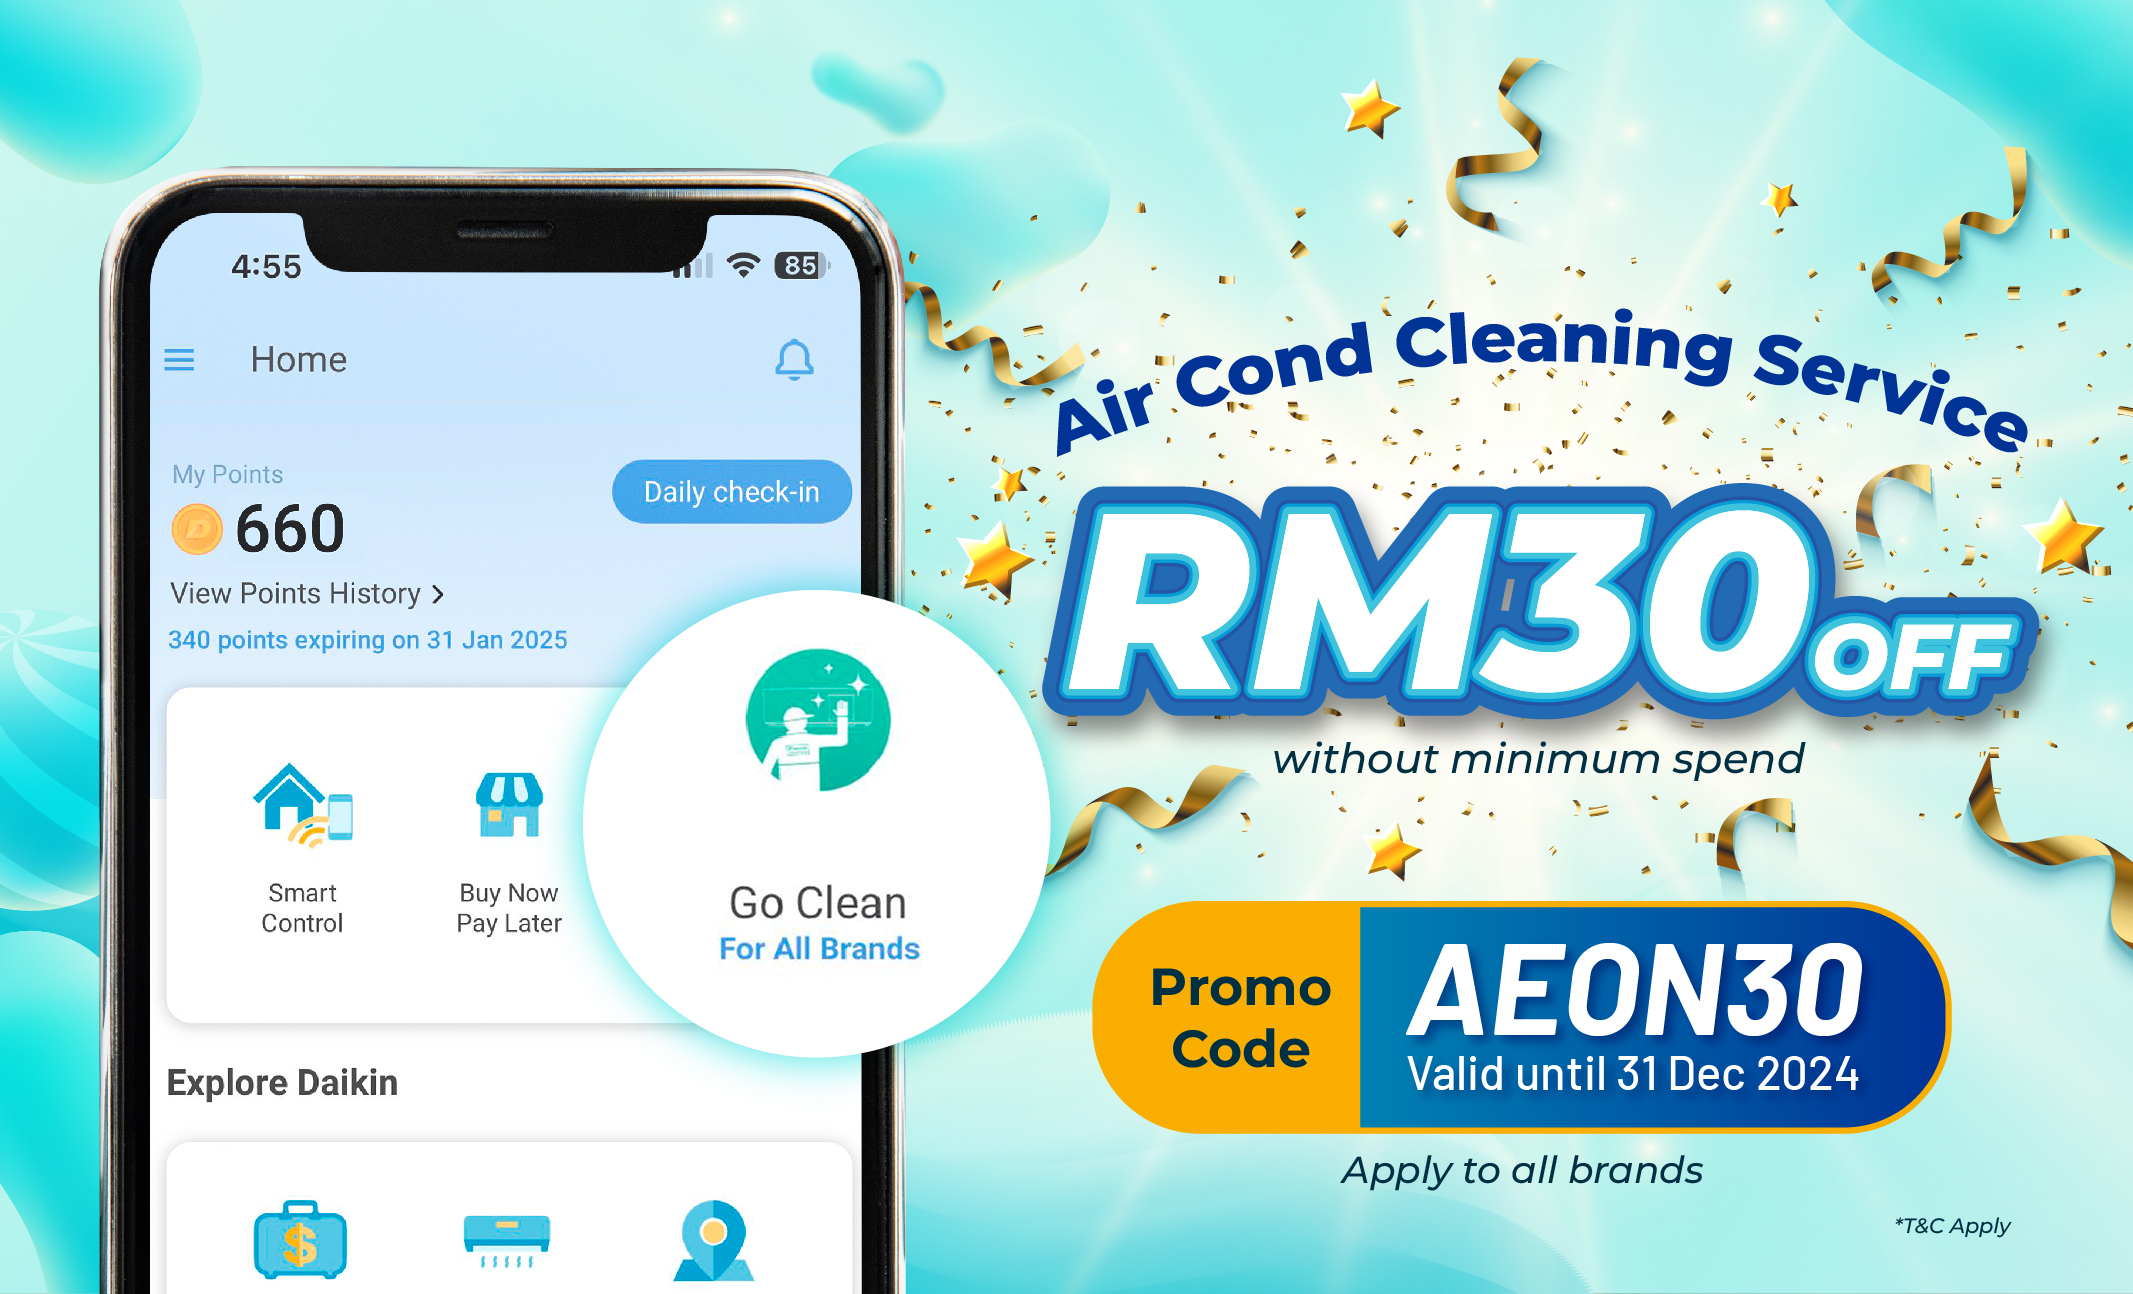 AEON30 Get RM30 Off For Every Unit | Daikin Malaysia